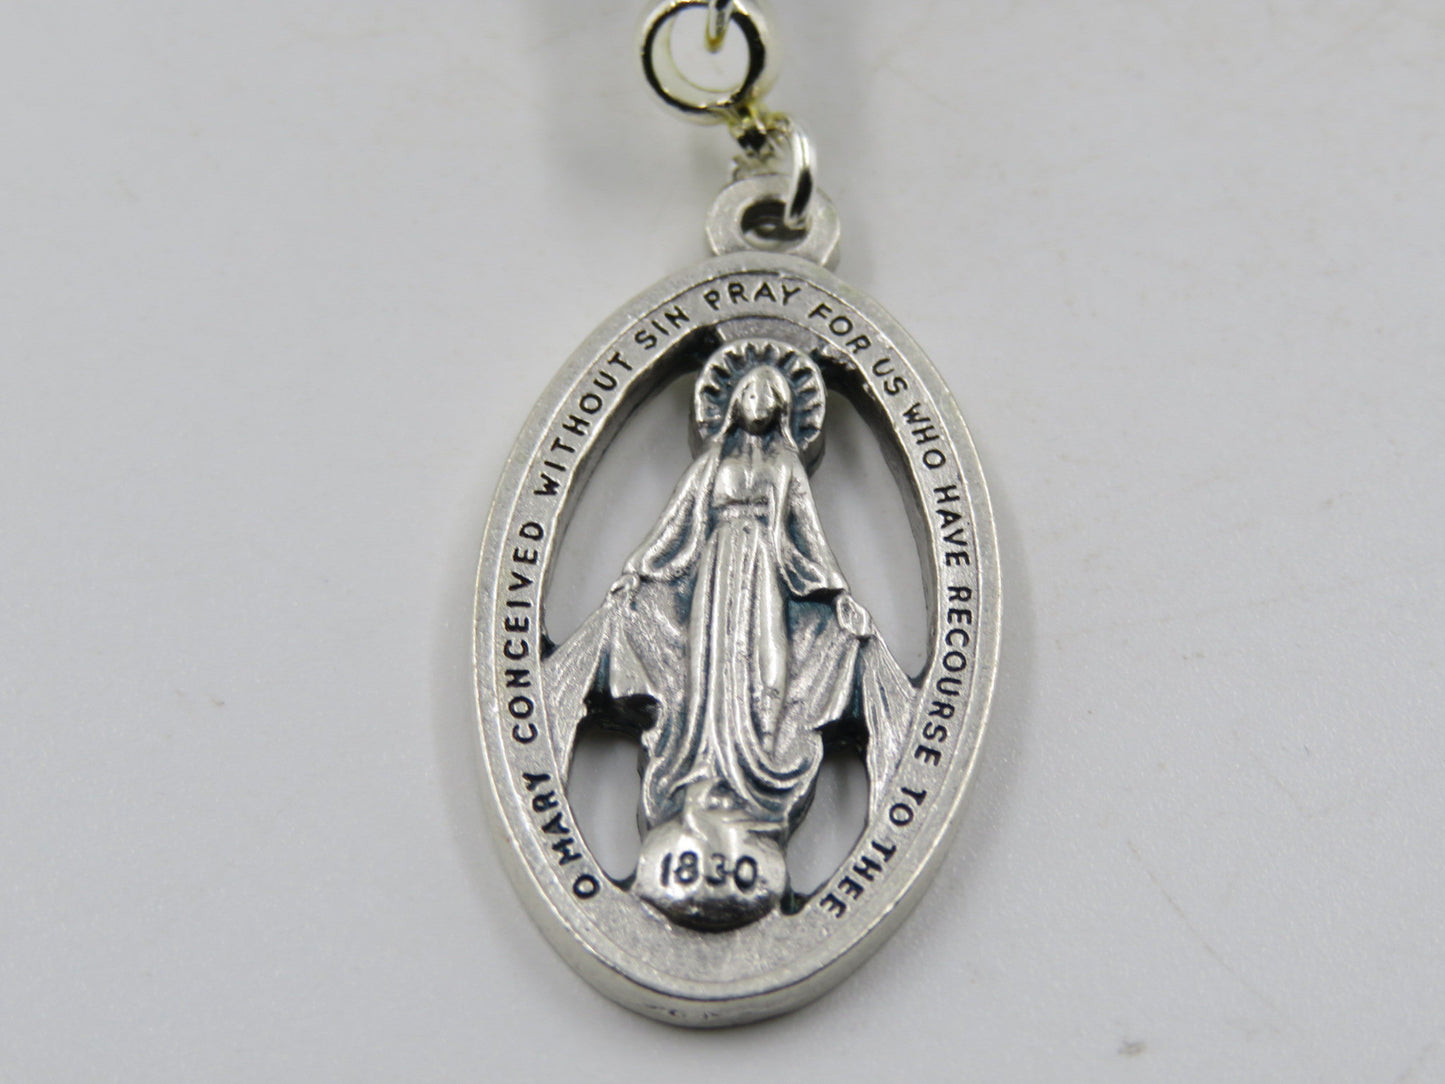 Large Miraculous medal purse clip, Religious Key chain medal, Rosary beads, Three Hail Mary bead, prayer beads, Ave Maria beads.